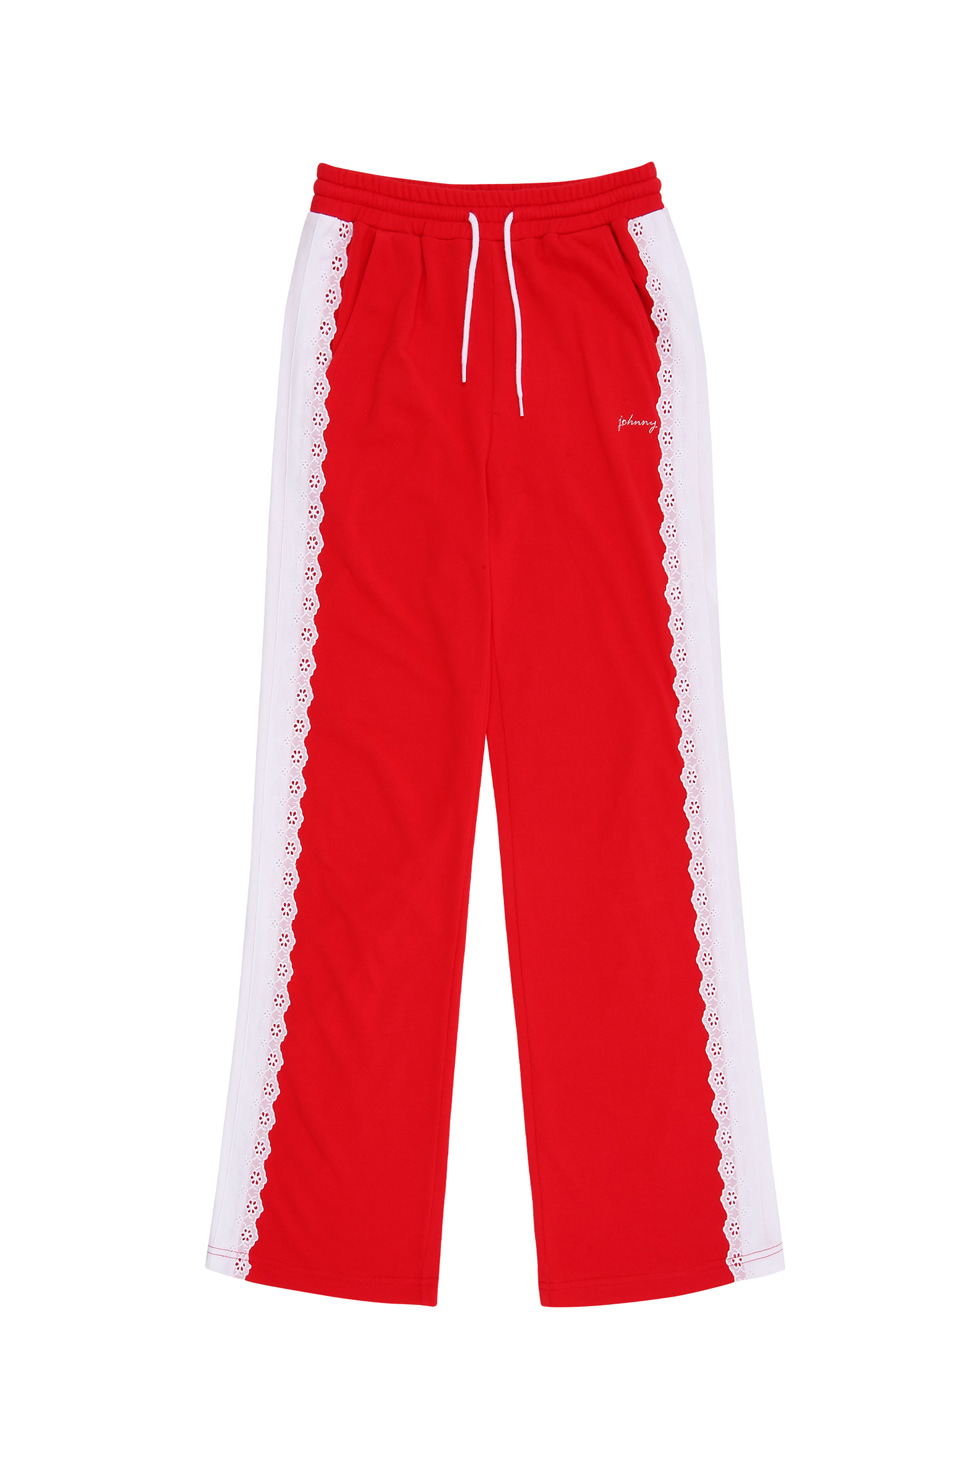 LACE JERSEY PANTS - RED